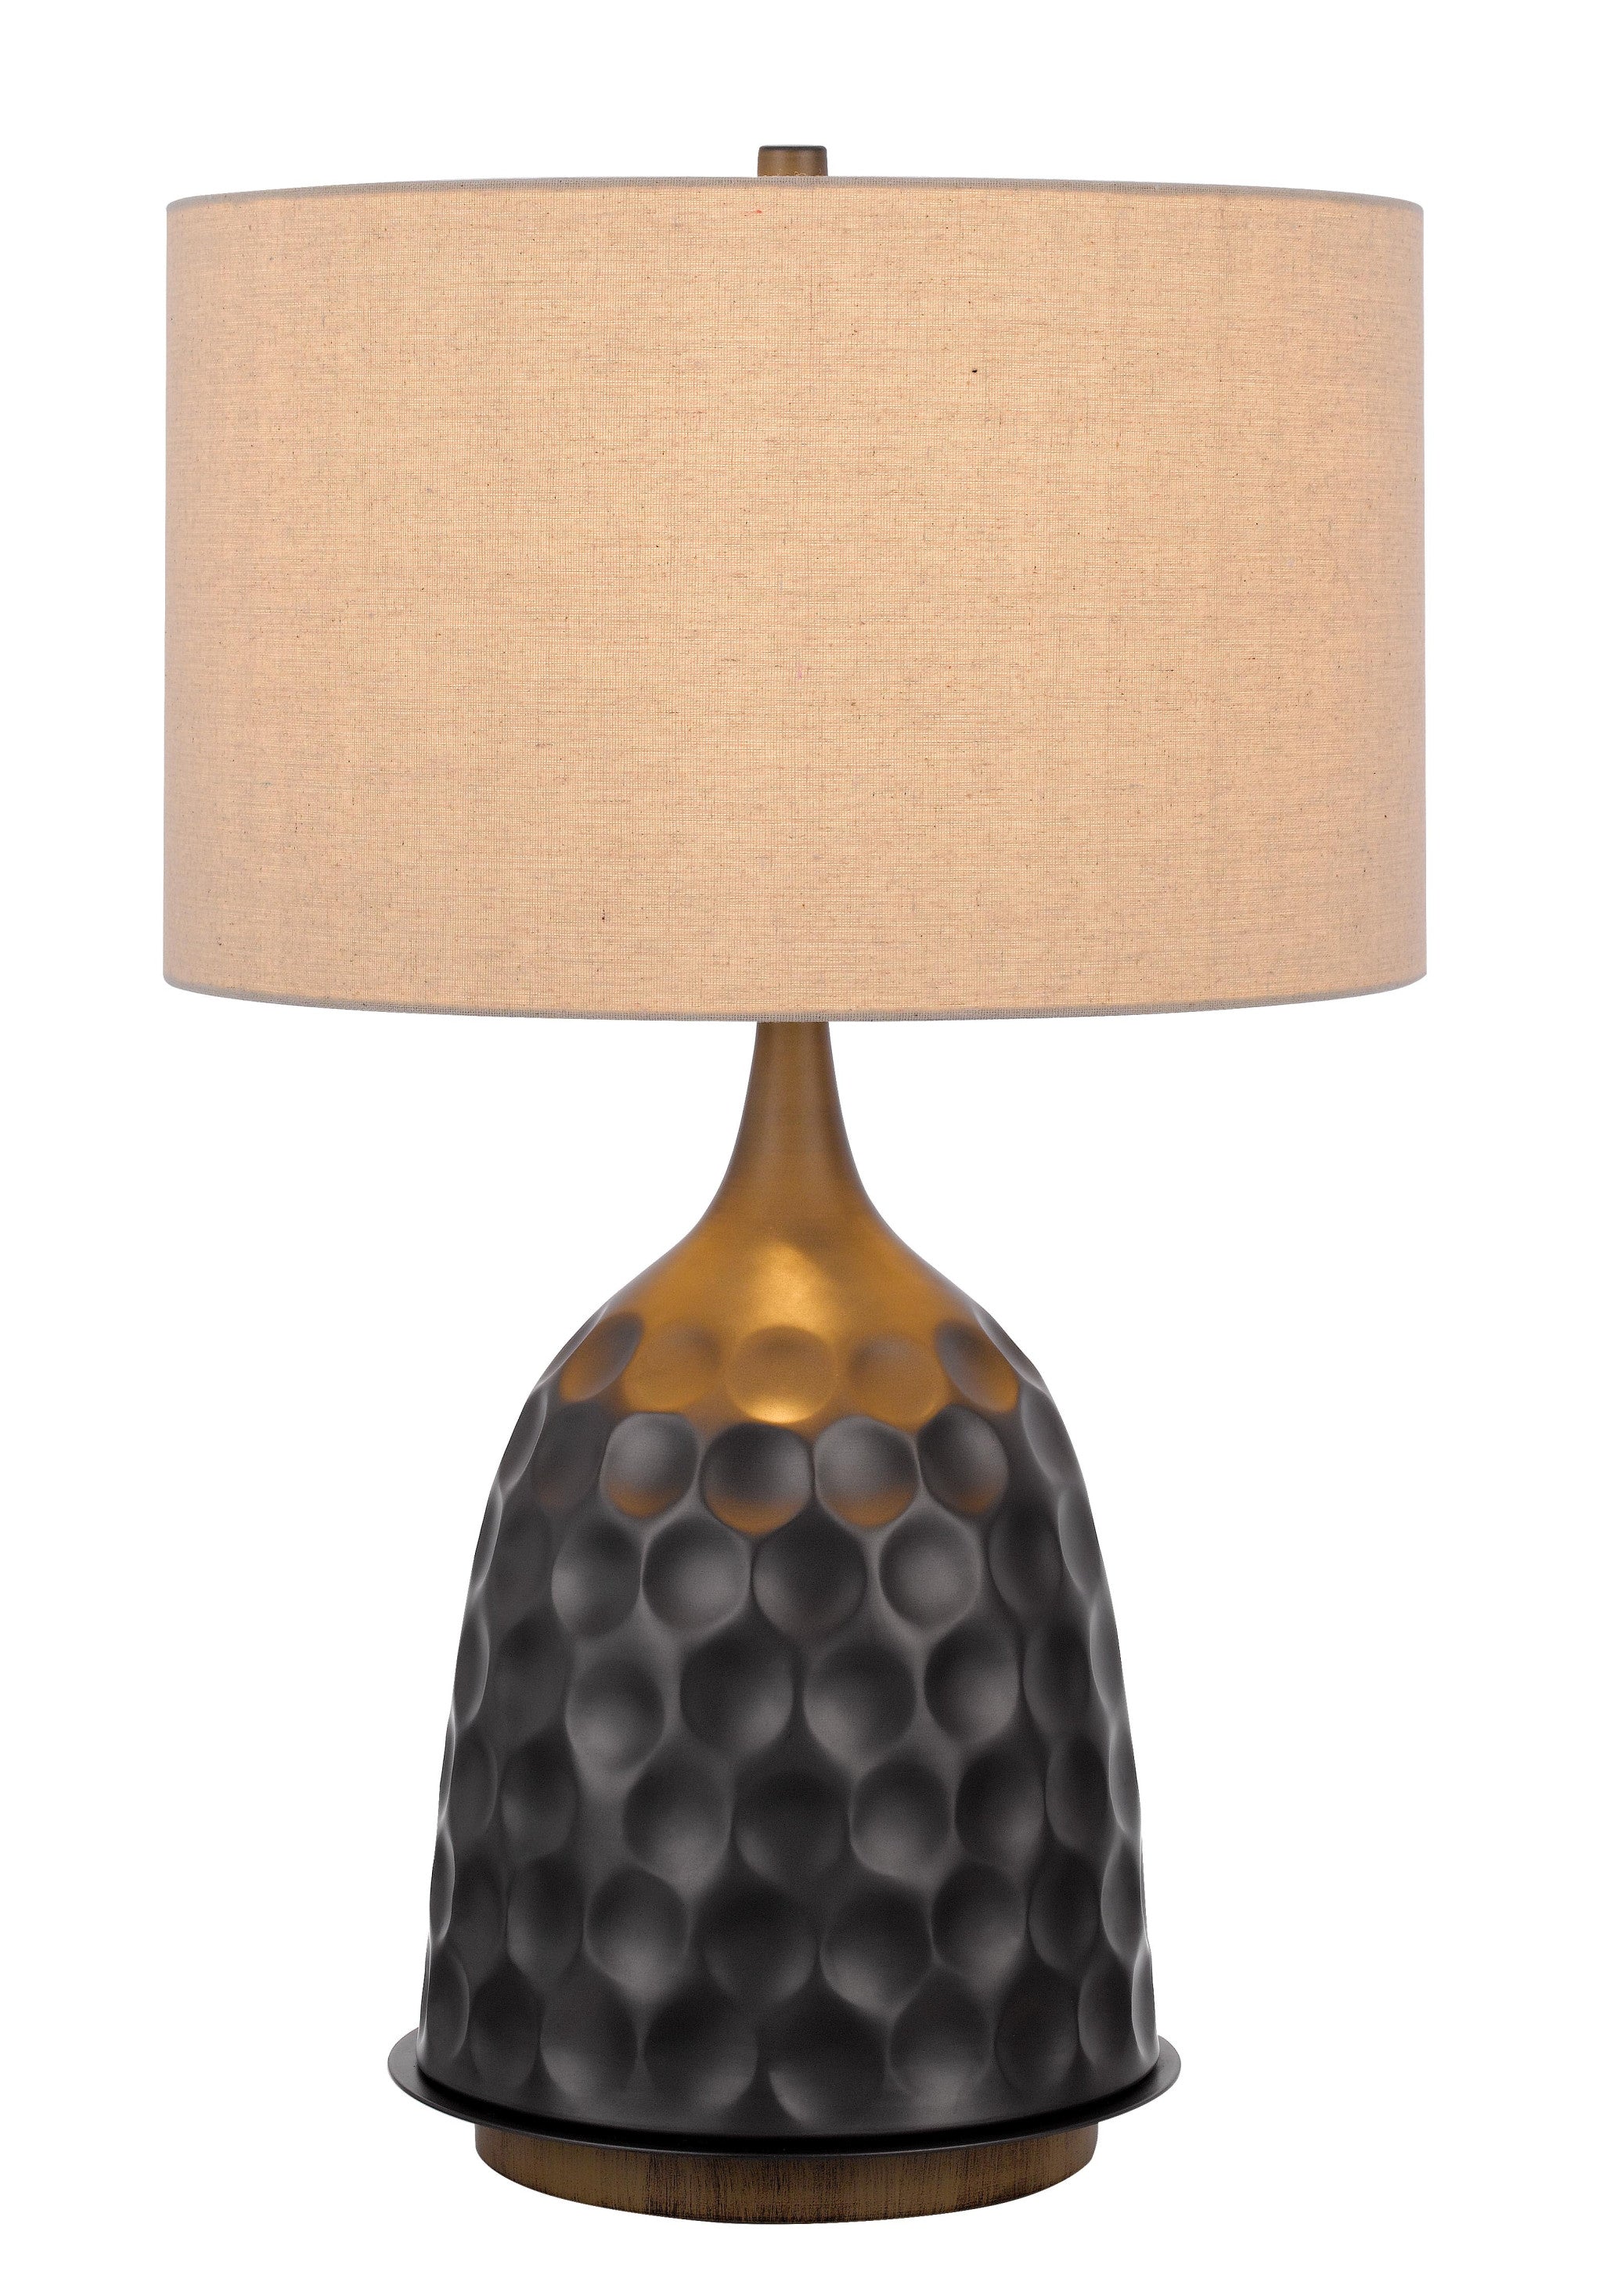 29" Gray Metal Table Lamp With Brown Drum Shade